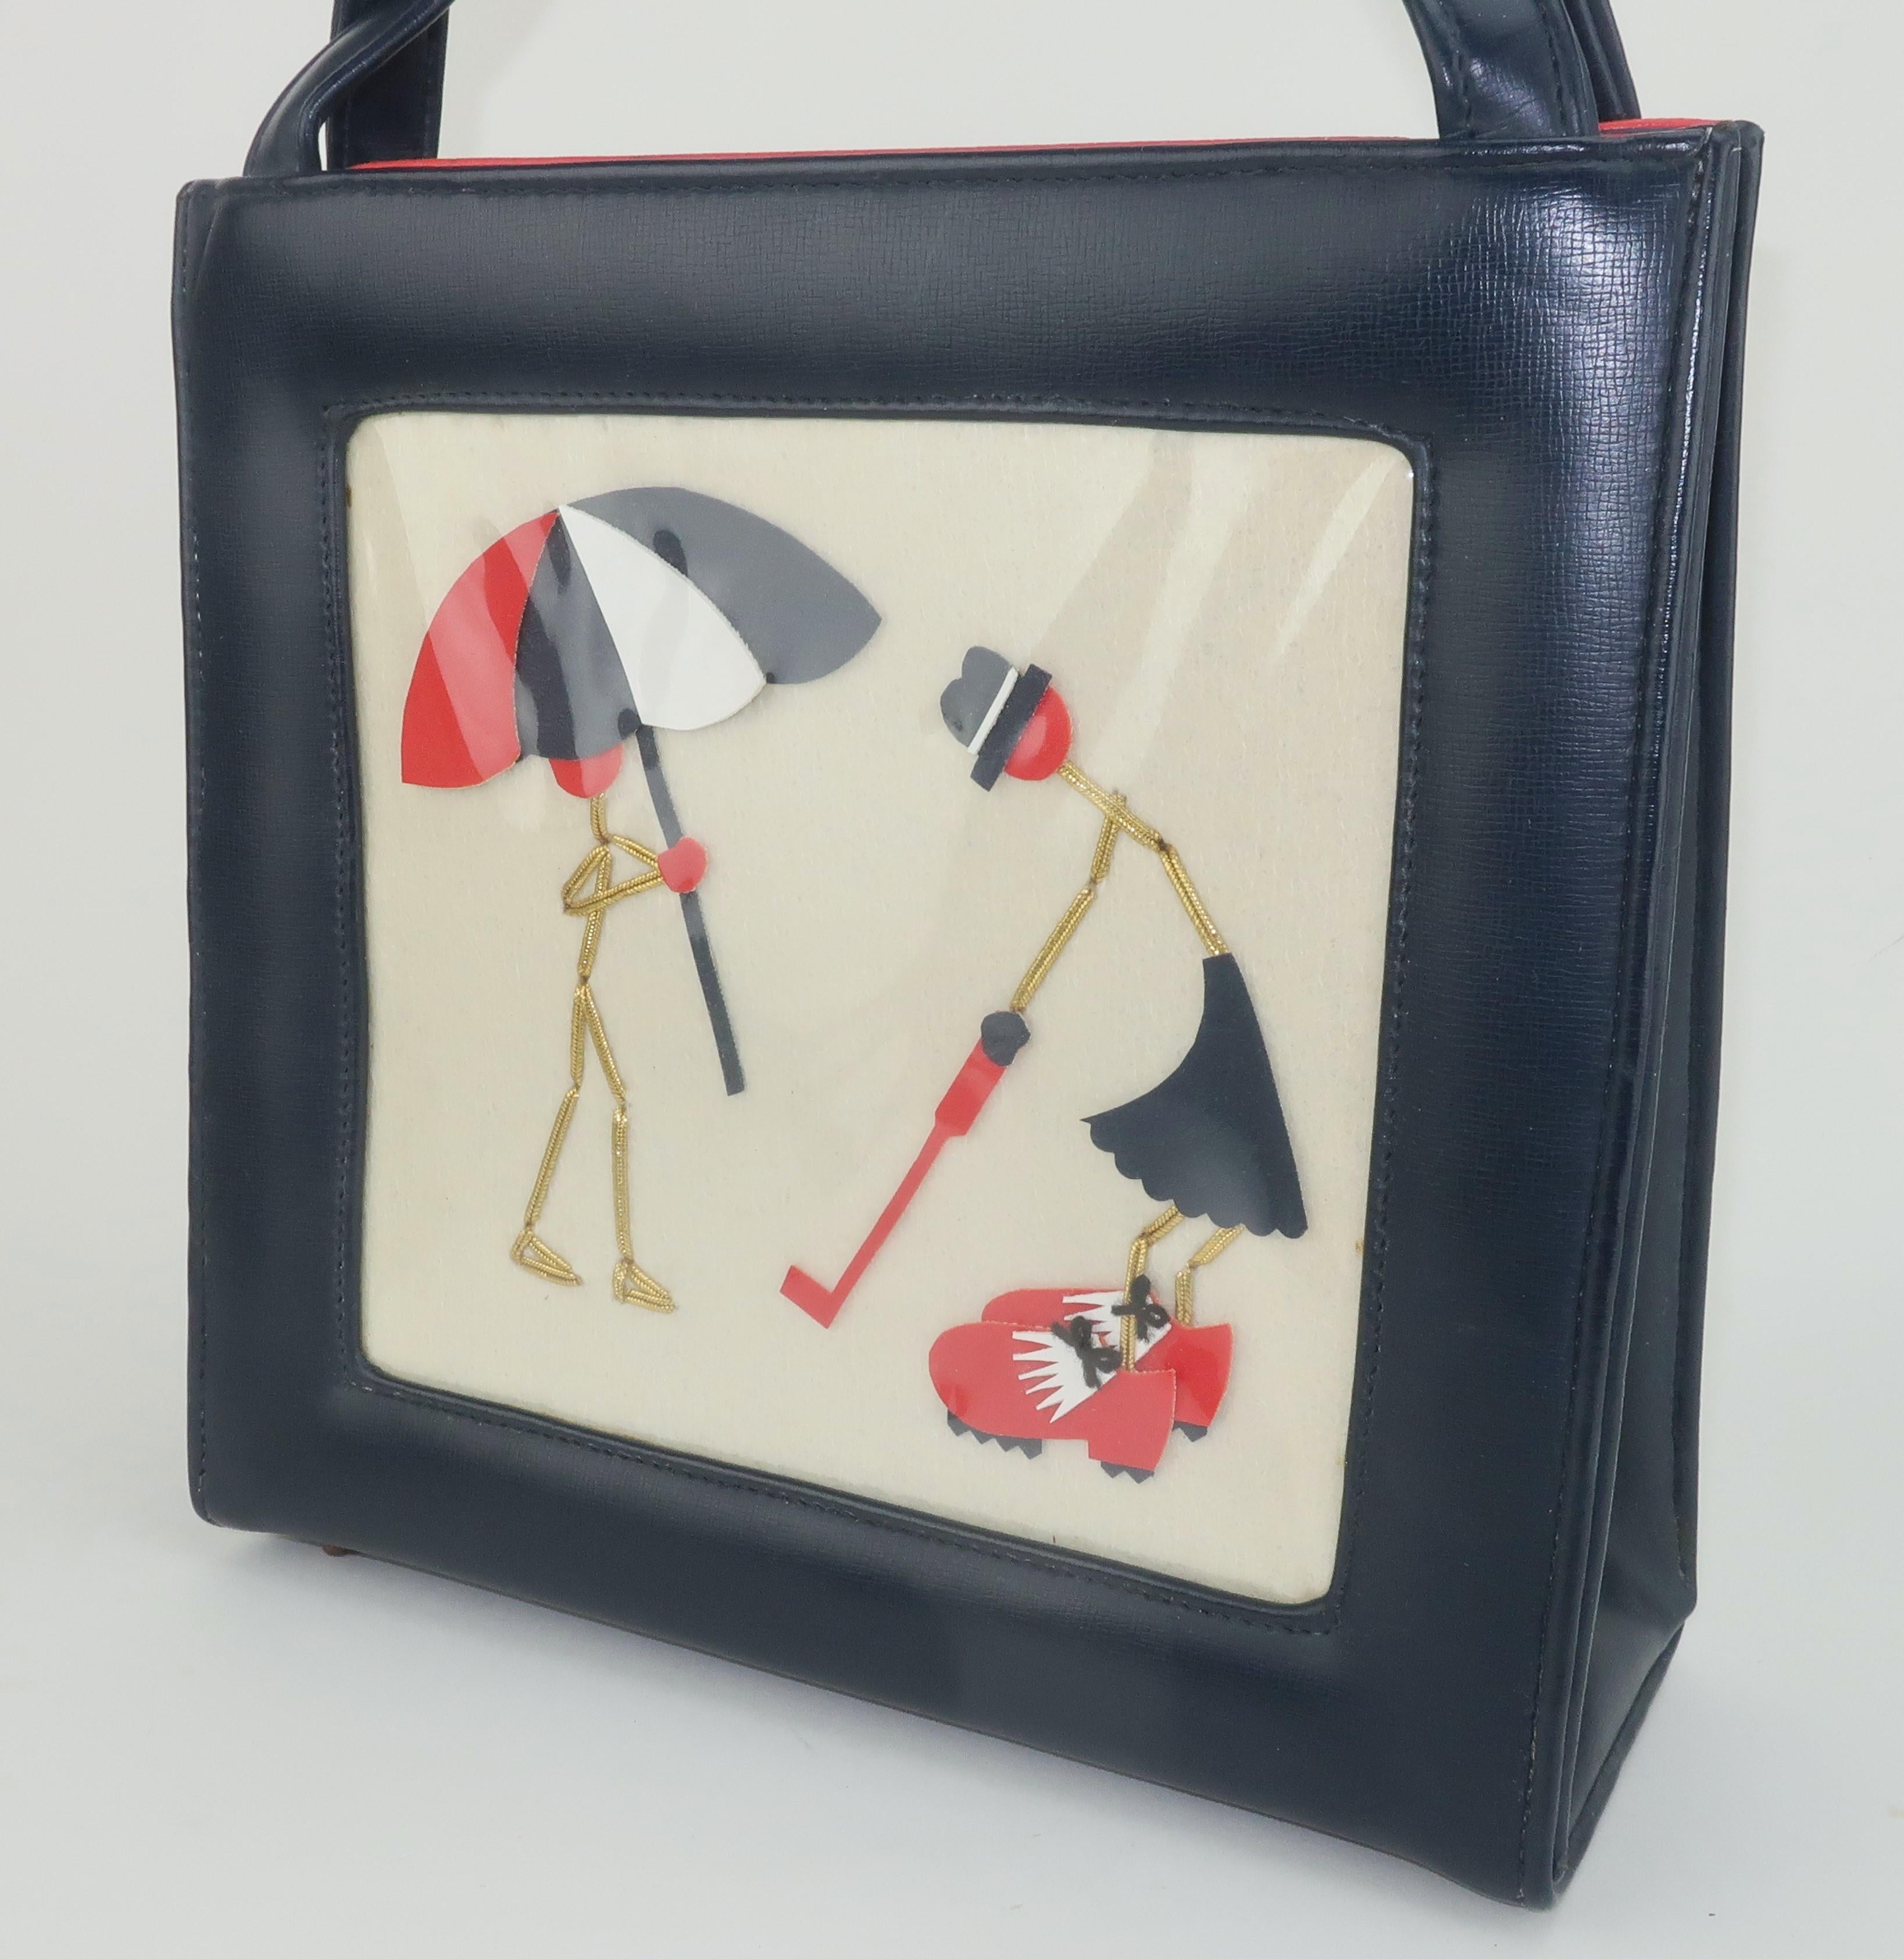 Fore!  Fun fashion alert!  C.1960 novelty top handle handbag with a charming golfing motif by Owen Originals of Florida.  The vinyl or leatherette handbag is in navy blue with a red interior and a leatherette applique of golfer and caddie at the